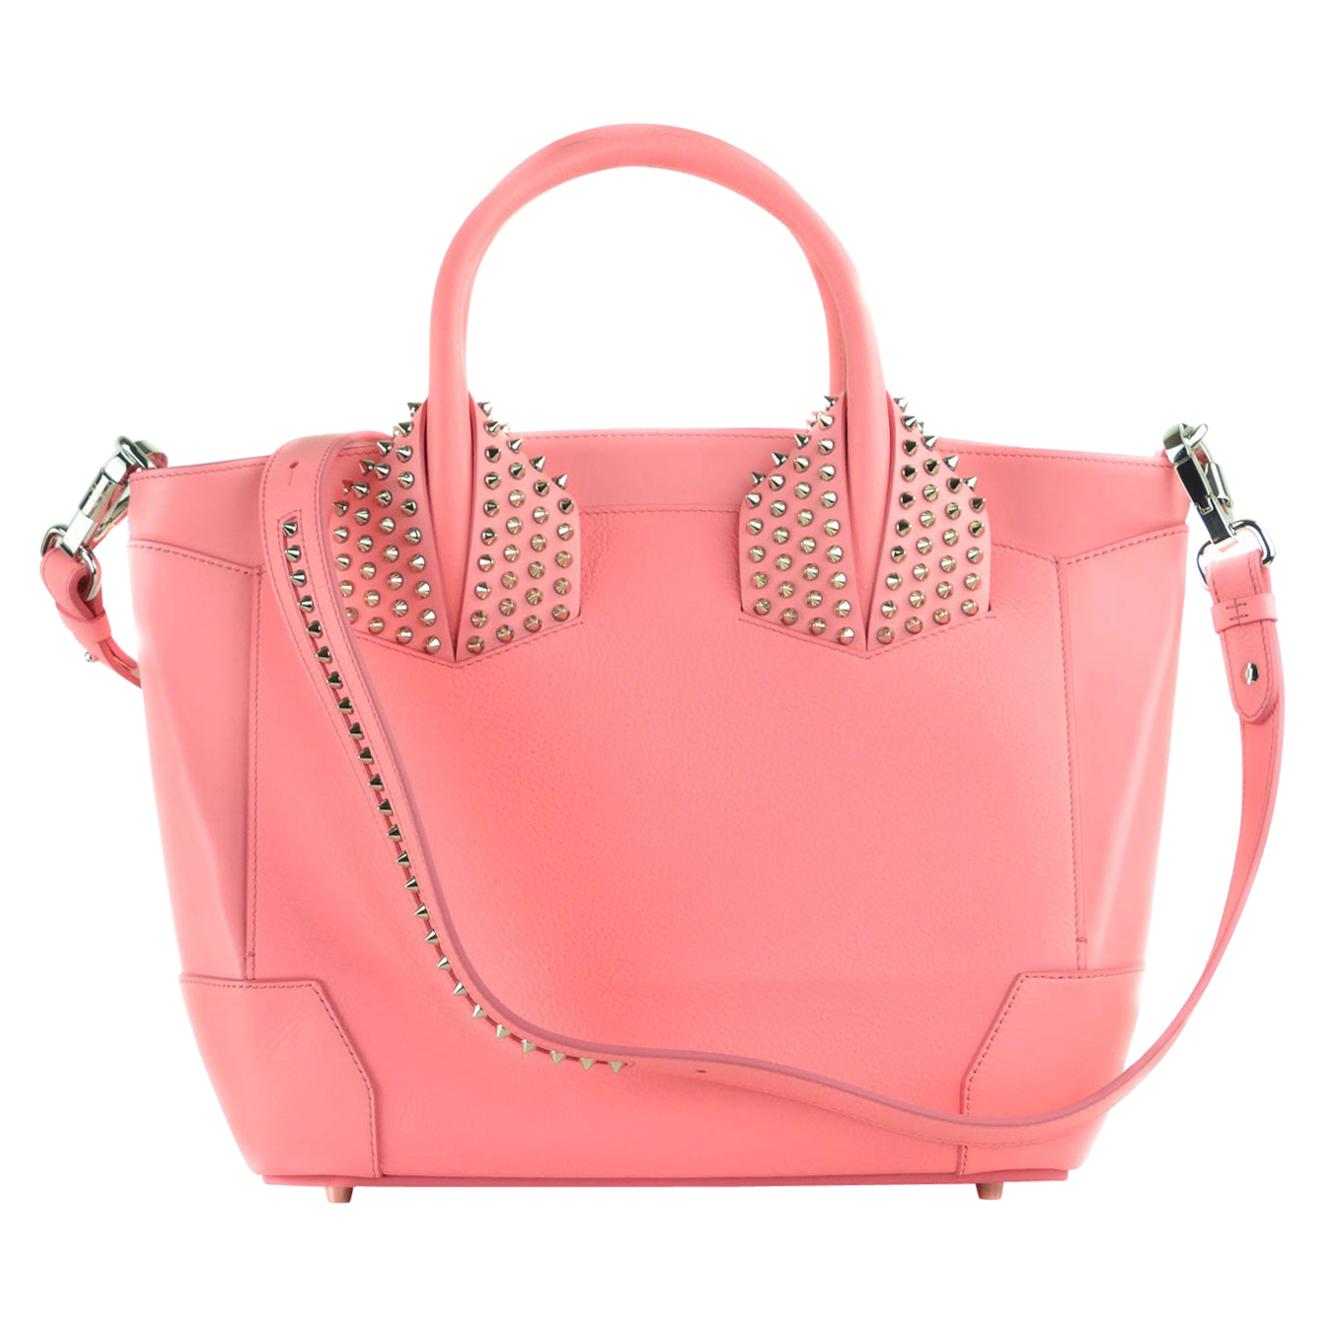 Christian Louboutin Women's Eloise Pink Large Tote For Sale